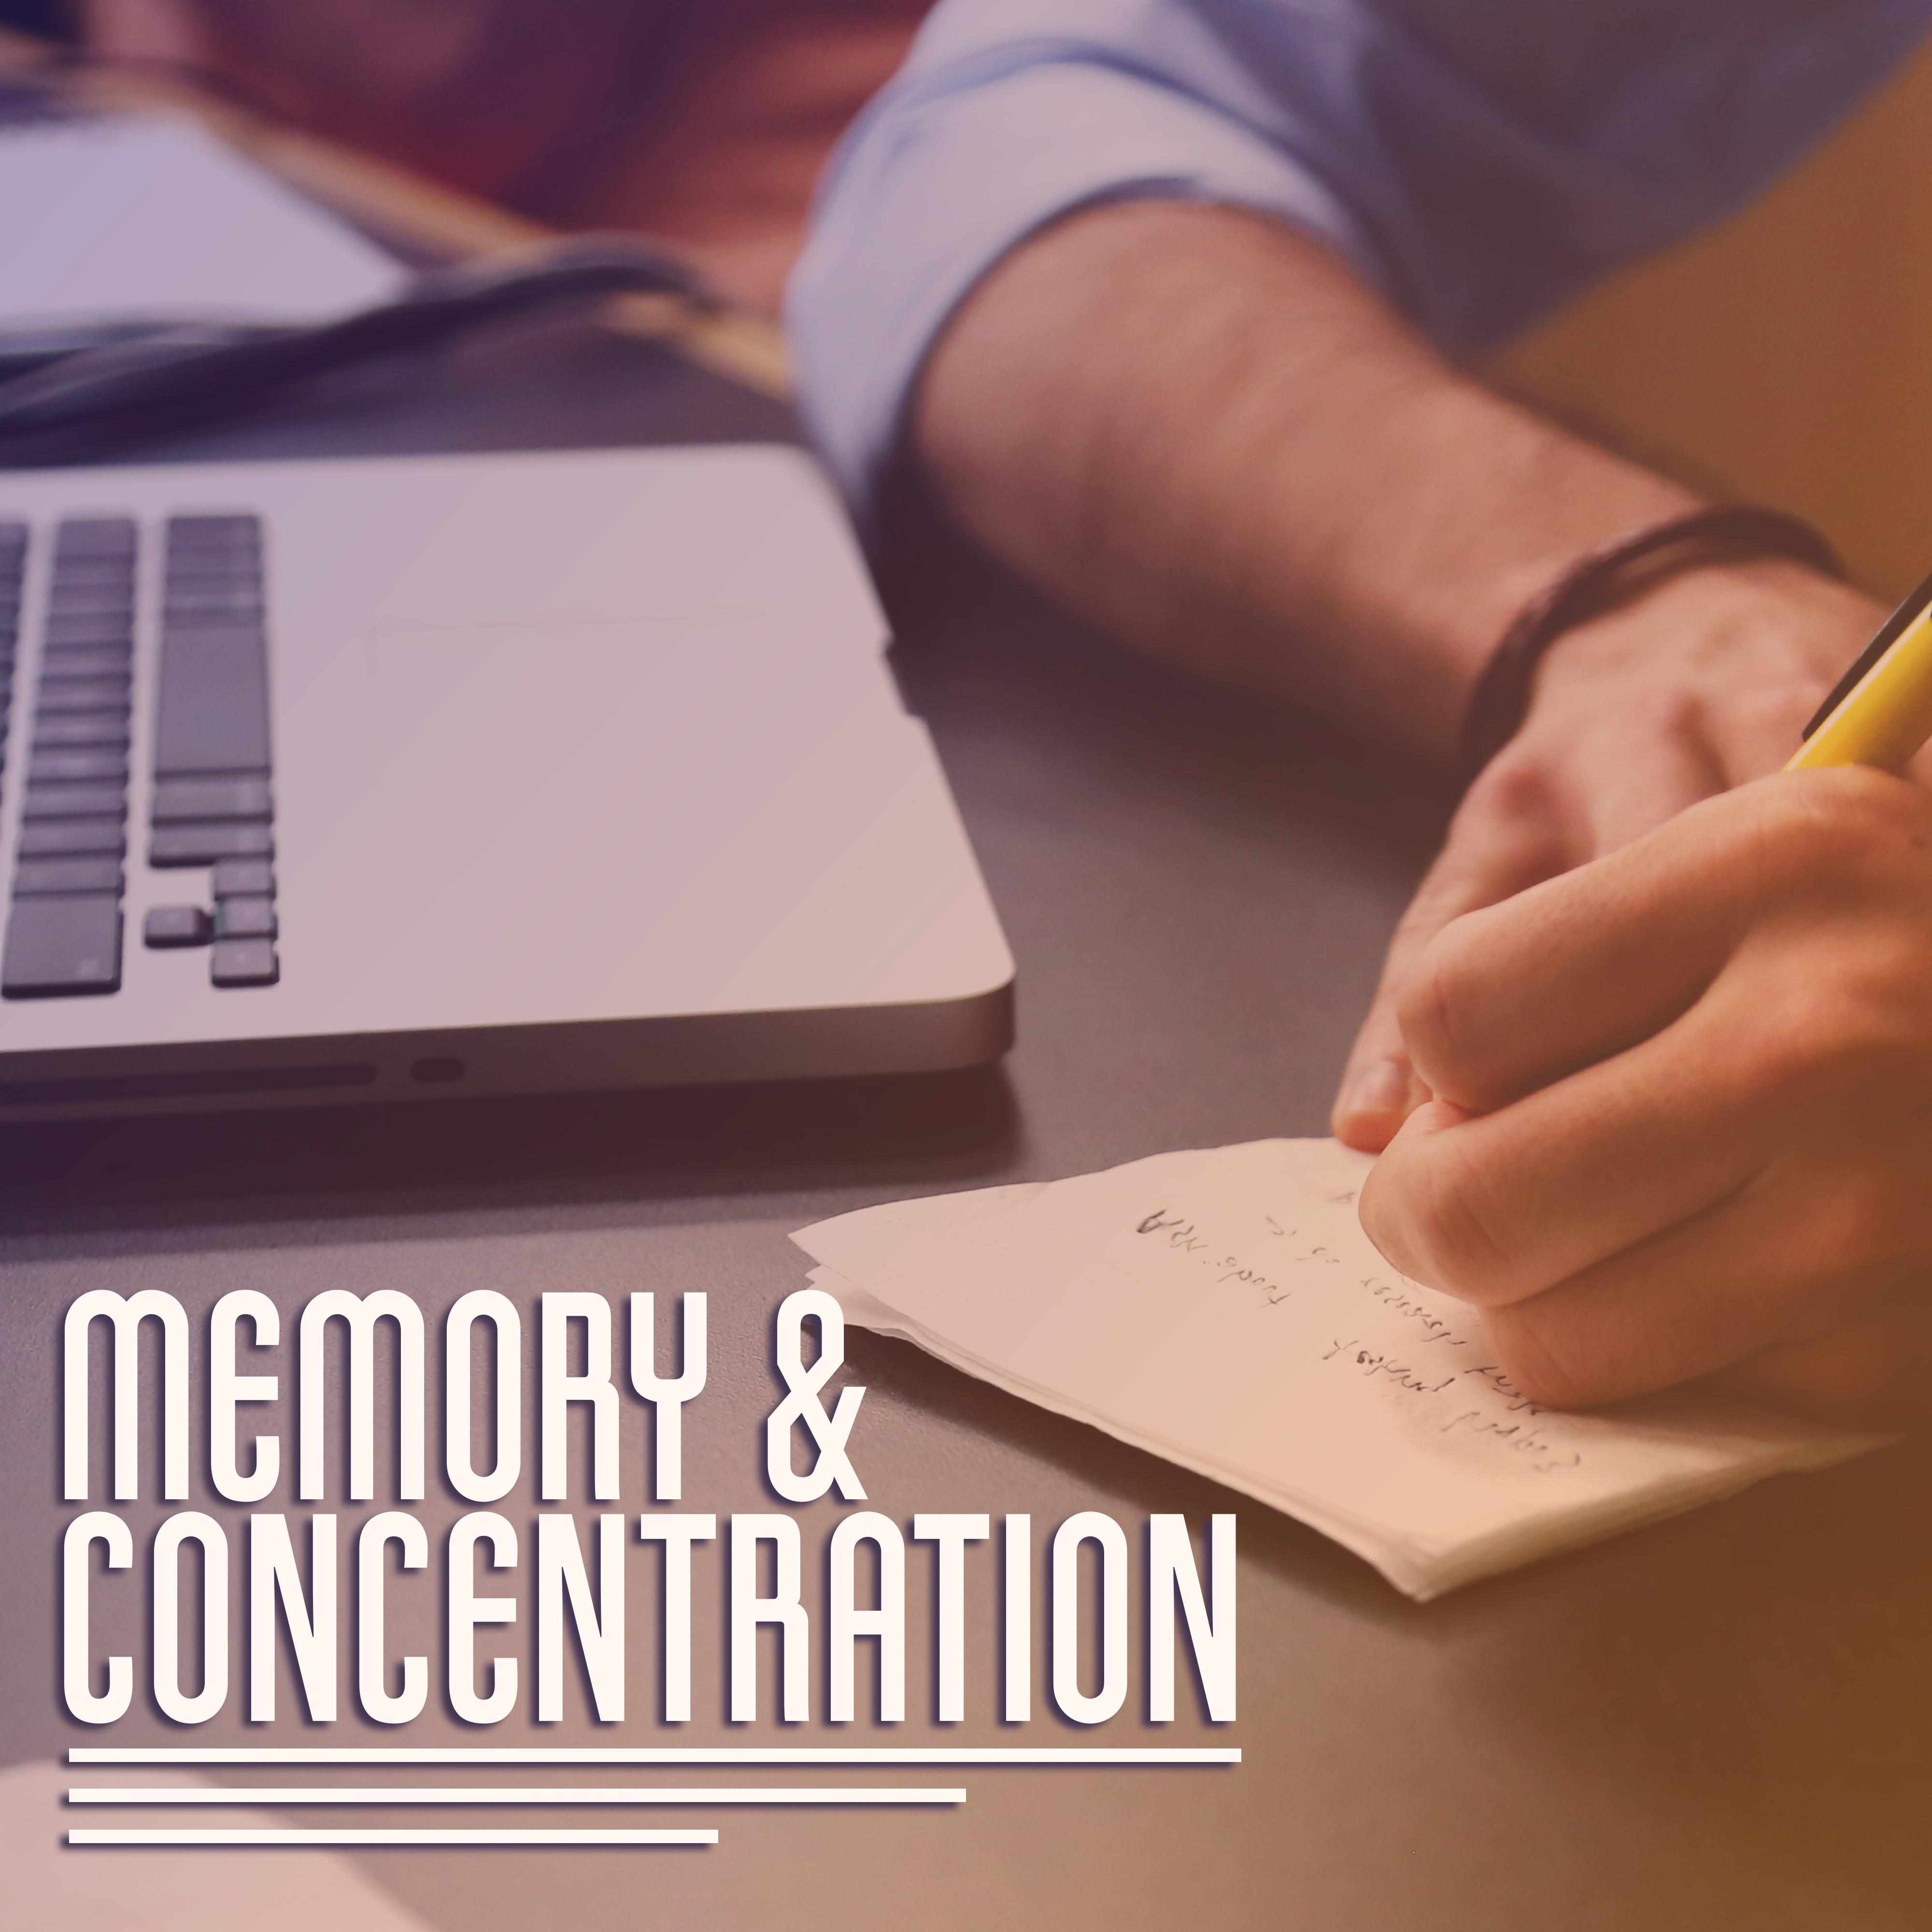 Memory  Concentration  Instrumental Music for Study, Brain Power, Effective Learning, Classical Sounds Relieve Stress